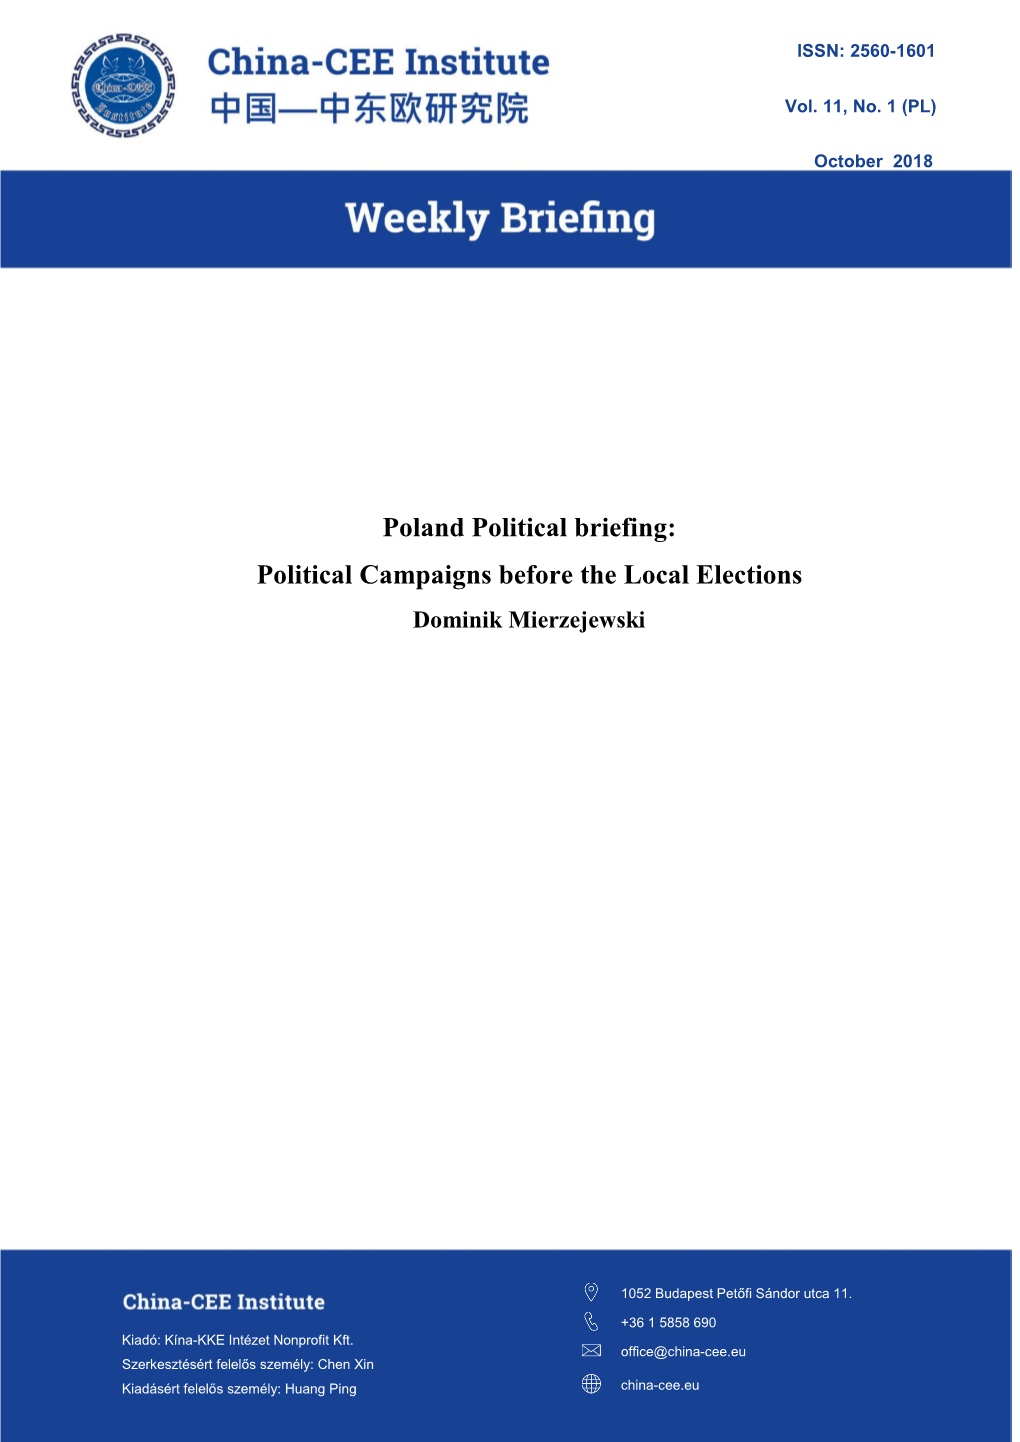 Poland Political Briefing: Political Campaigns Before the Local Elections Dominik Mierzejewski